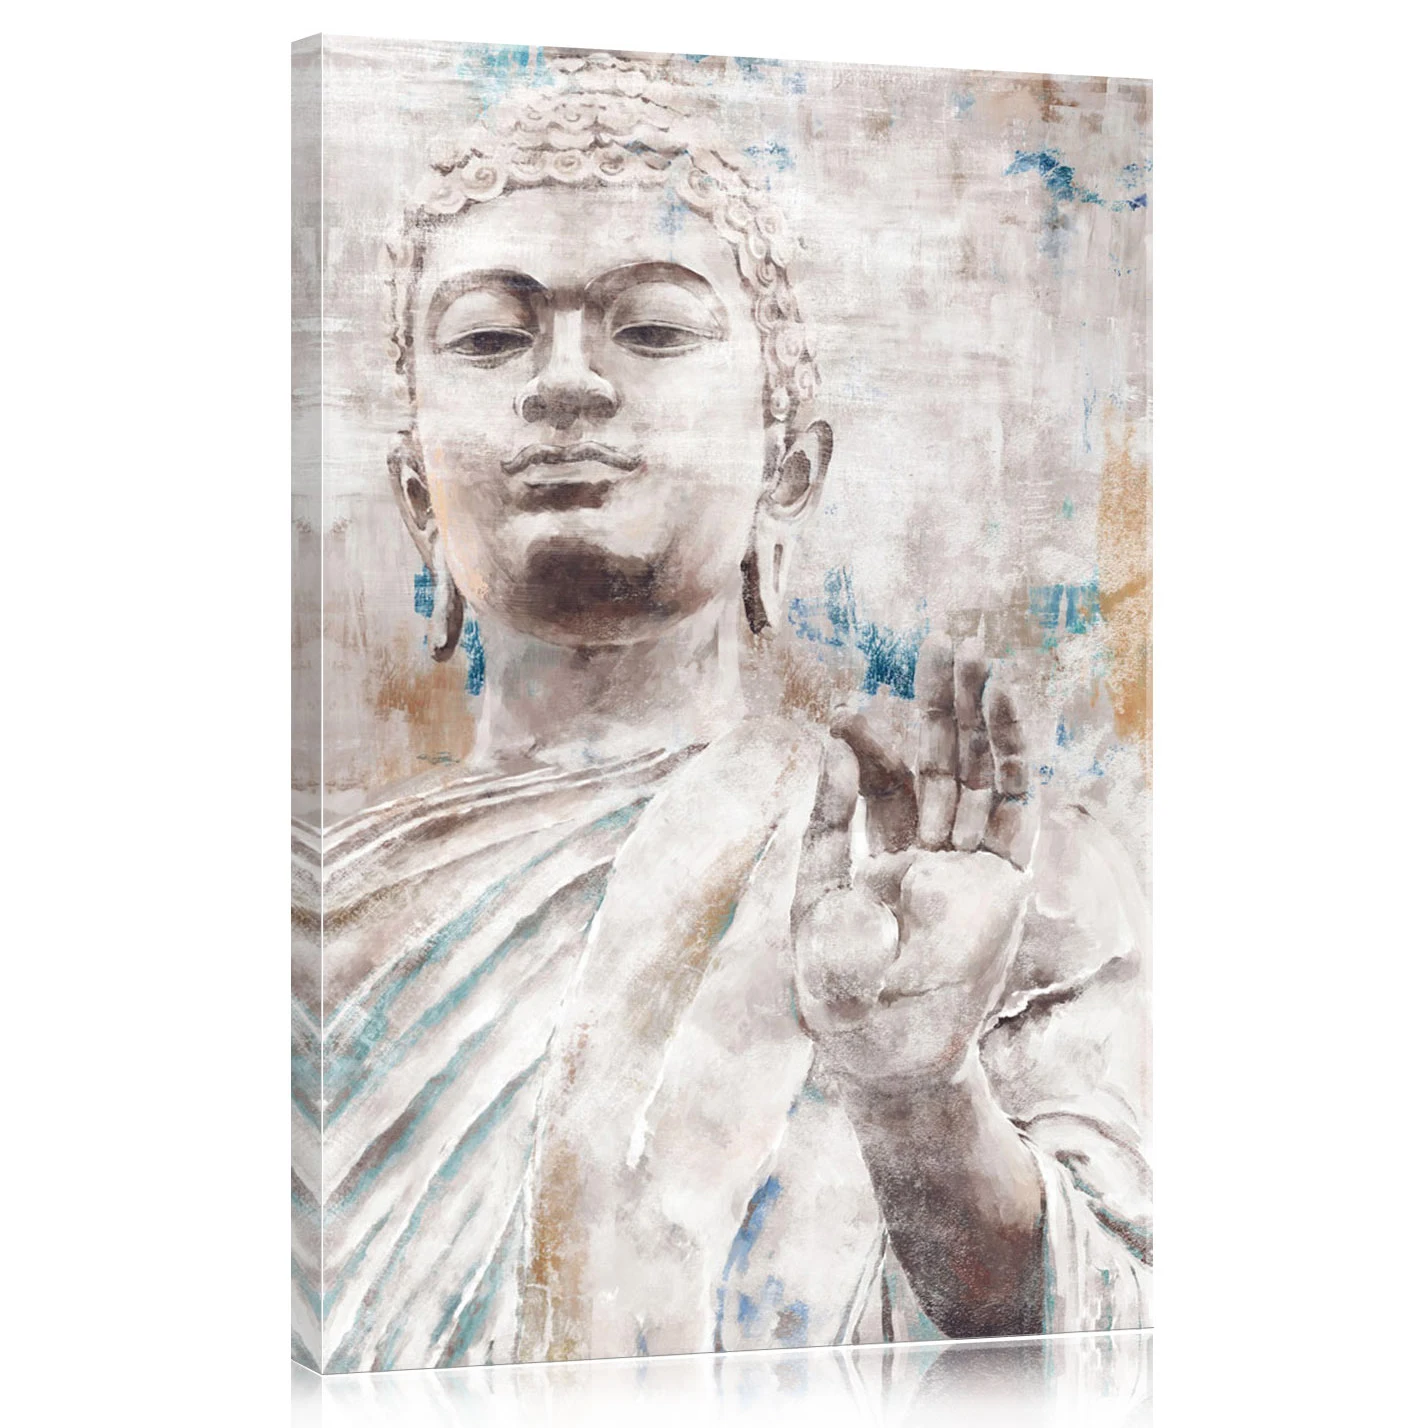 

Buddha Wall Art Zen Statue Canvas Painting Grey Posters for Rustic Bedroom Living Room Lotus Modern Home Decor Picture Yoga Room